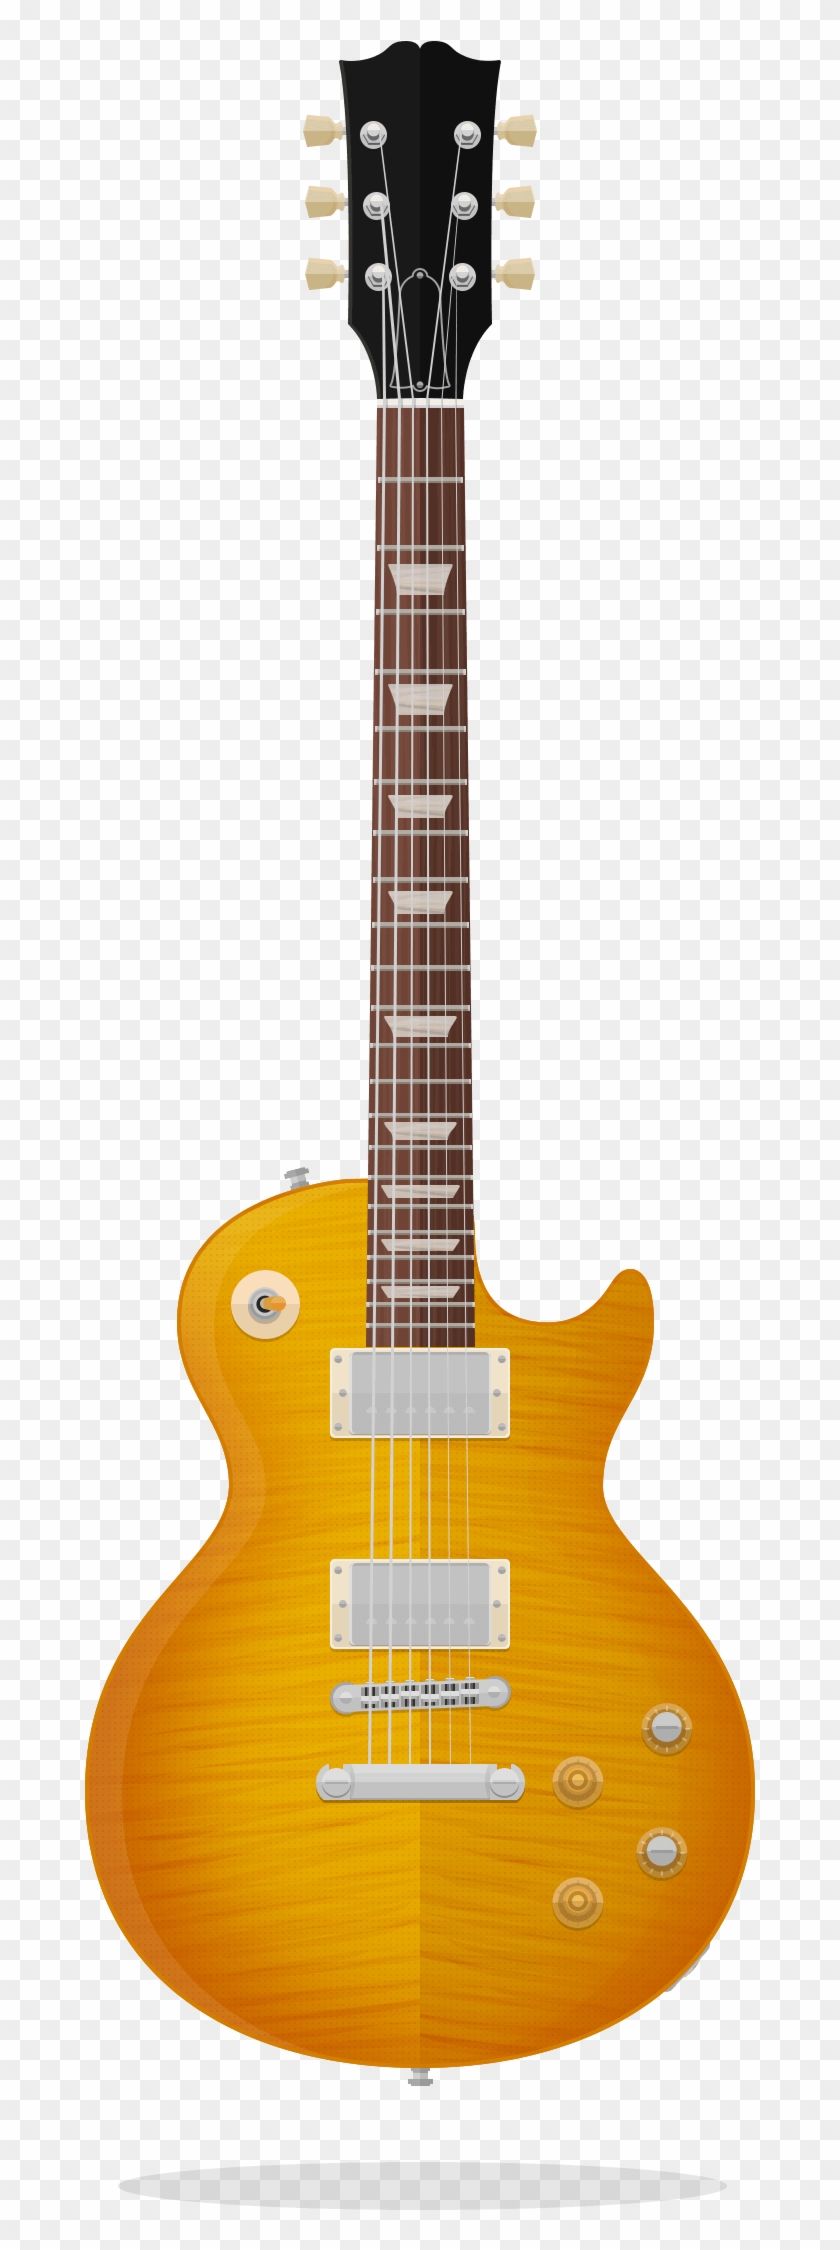 Gibson Les Paul Standard - Les Paul On Stand Clipart